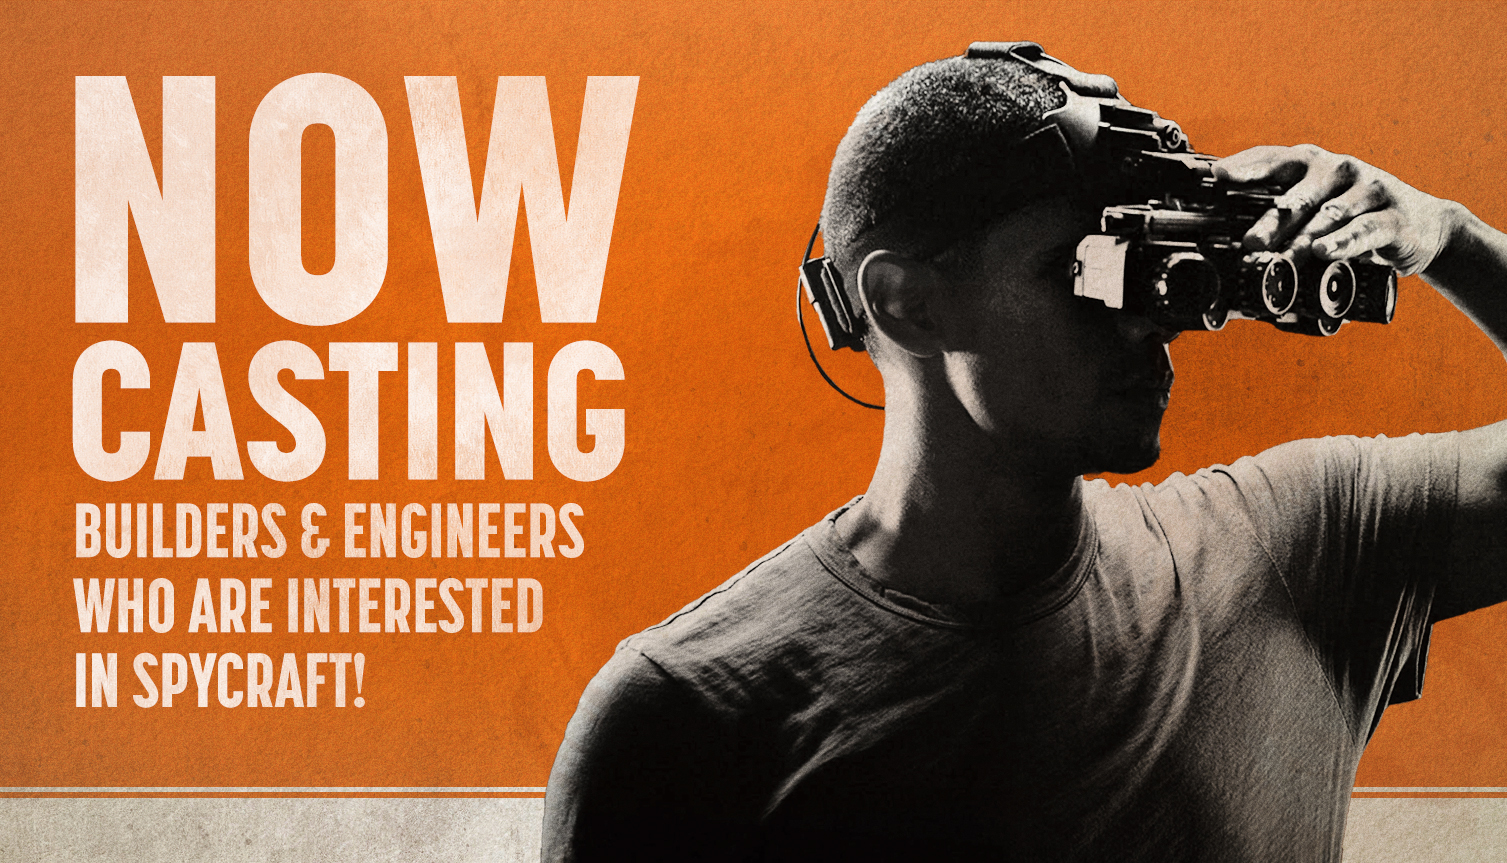 Now Casting Builders, SFX Experts & Engineers Who Are Interested in Spycraft to Co-Host a Brand New TV Show!